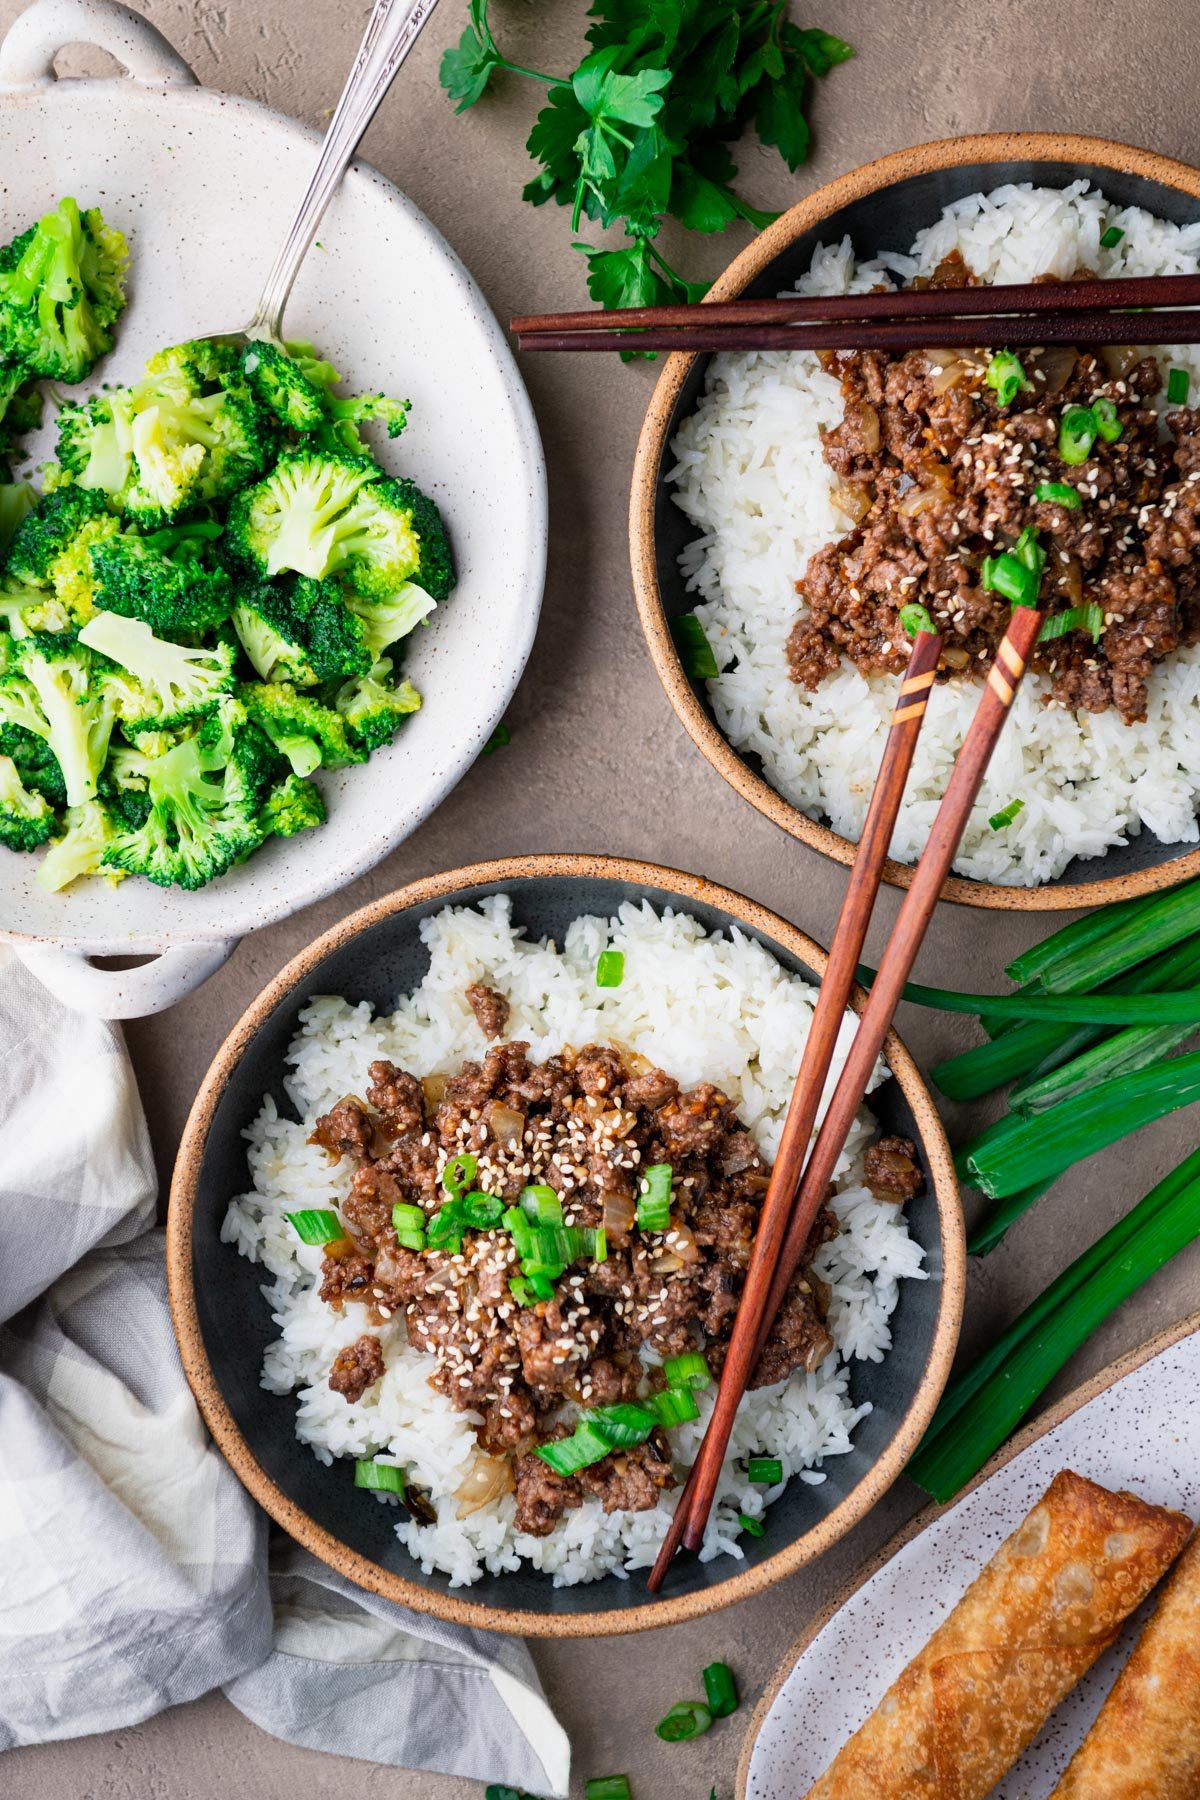 Overhead image of two bowls of ground beef teriyaki recipe on a table with a side of broccoli and egg rolls.